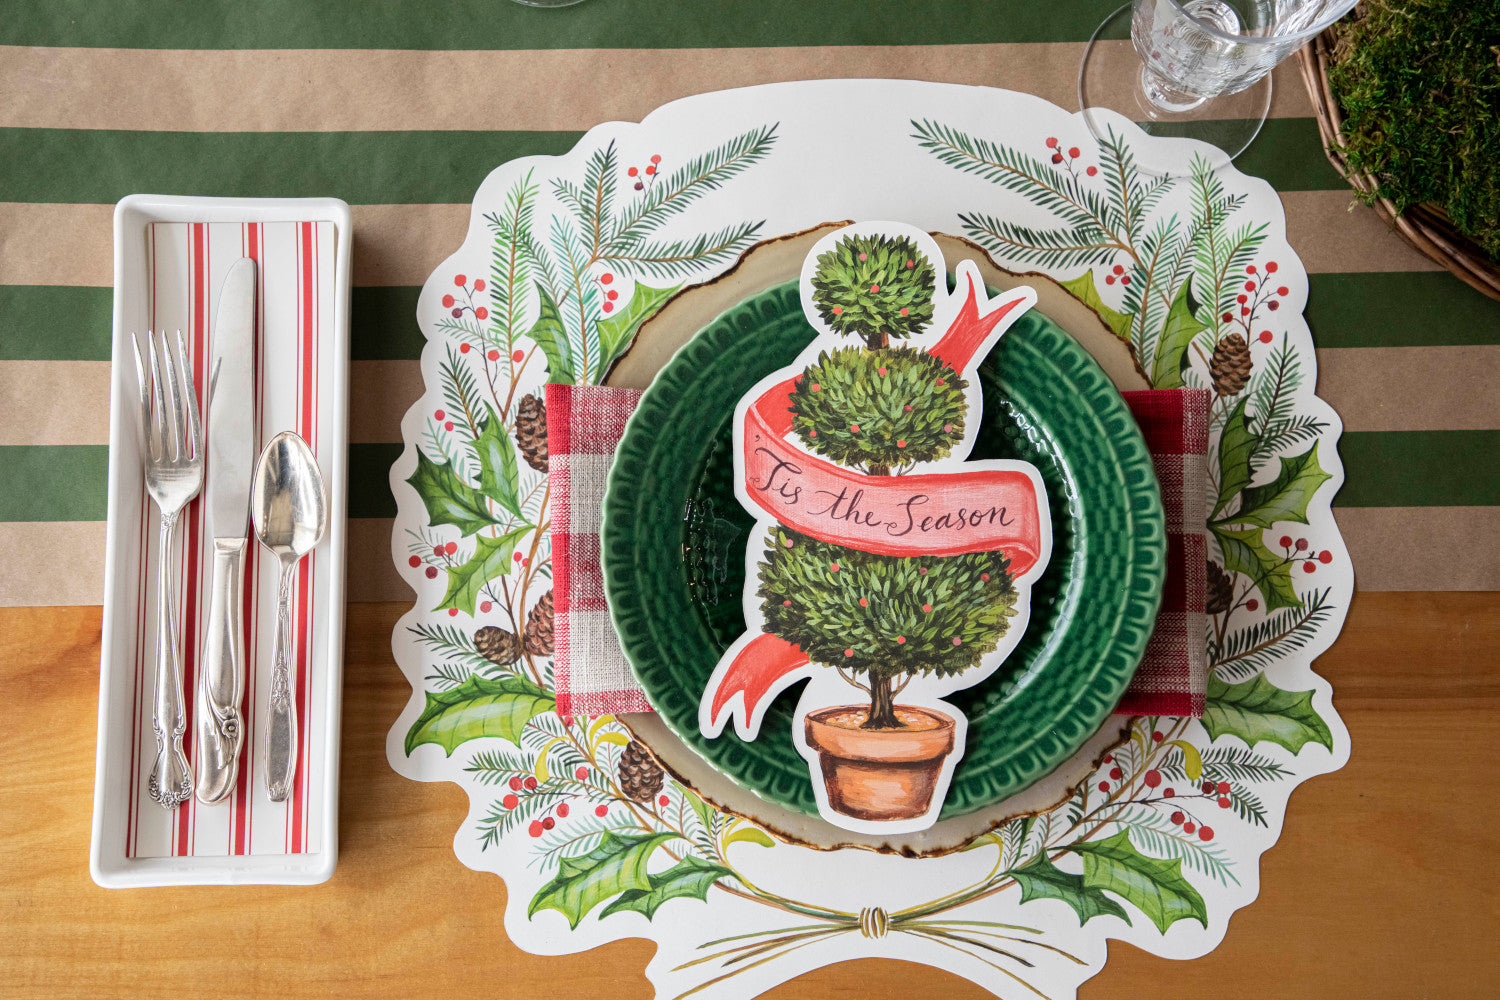 Die-cut Christmas Sprigs Placemat – Hester & Cook